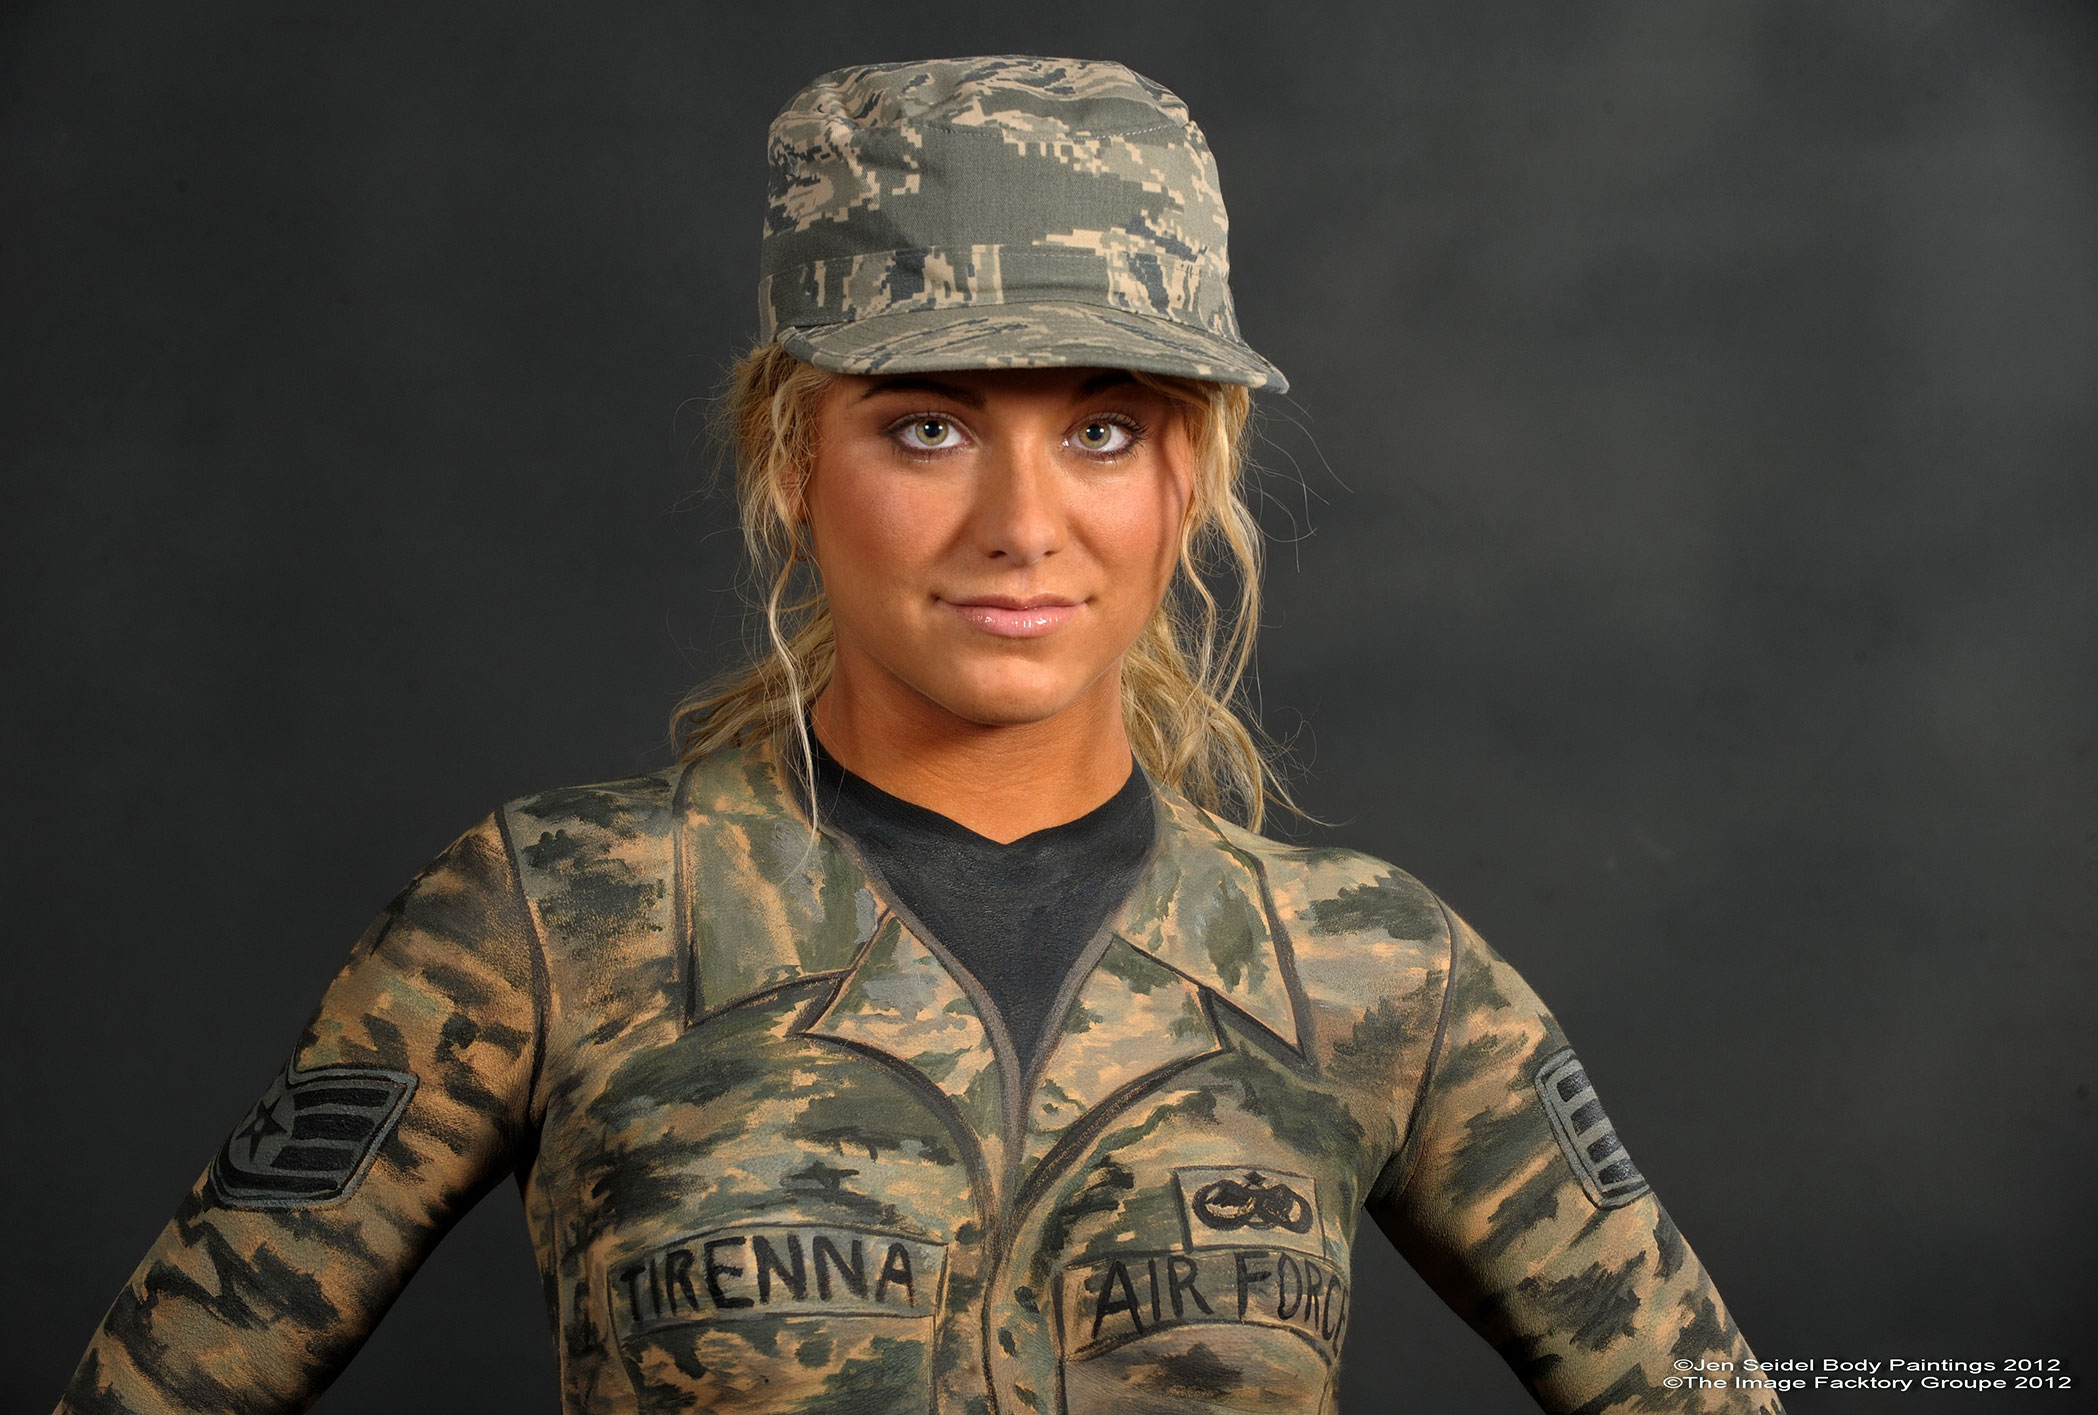 Military Body Paint Gallery by Professional Body Painter Jen Seidel.